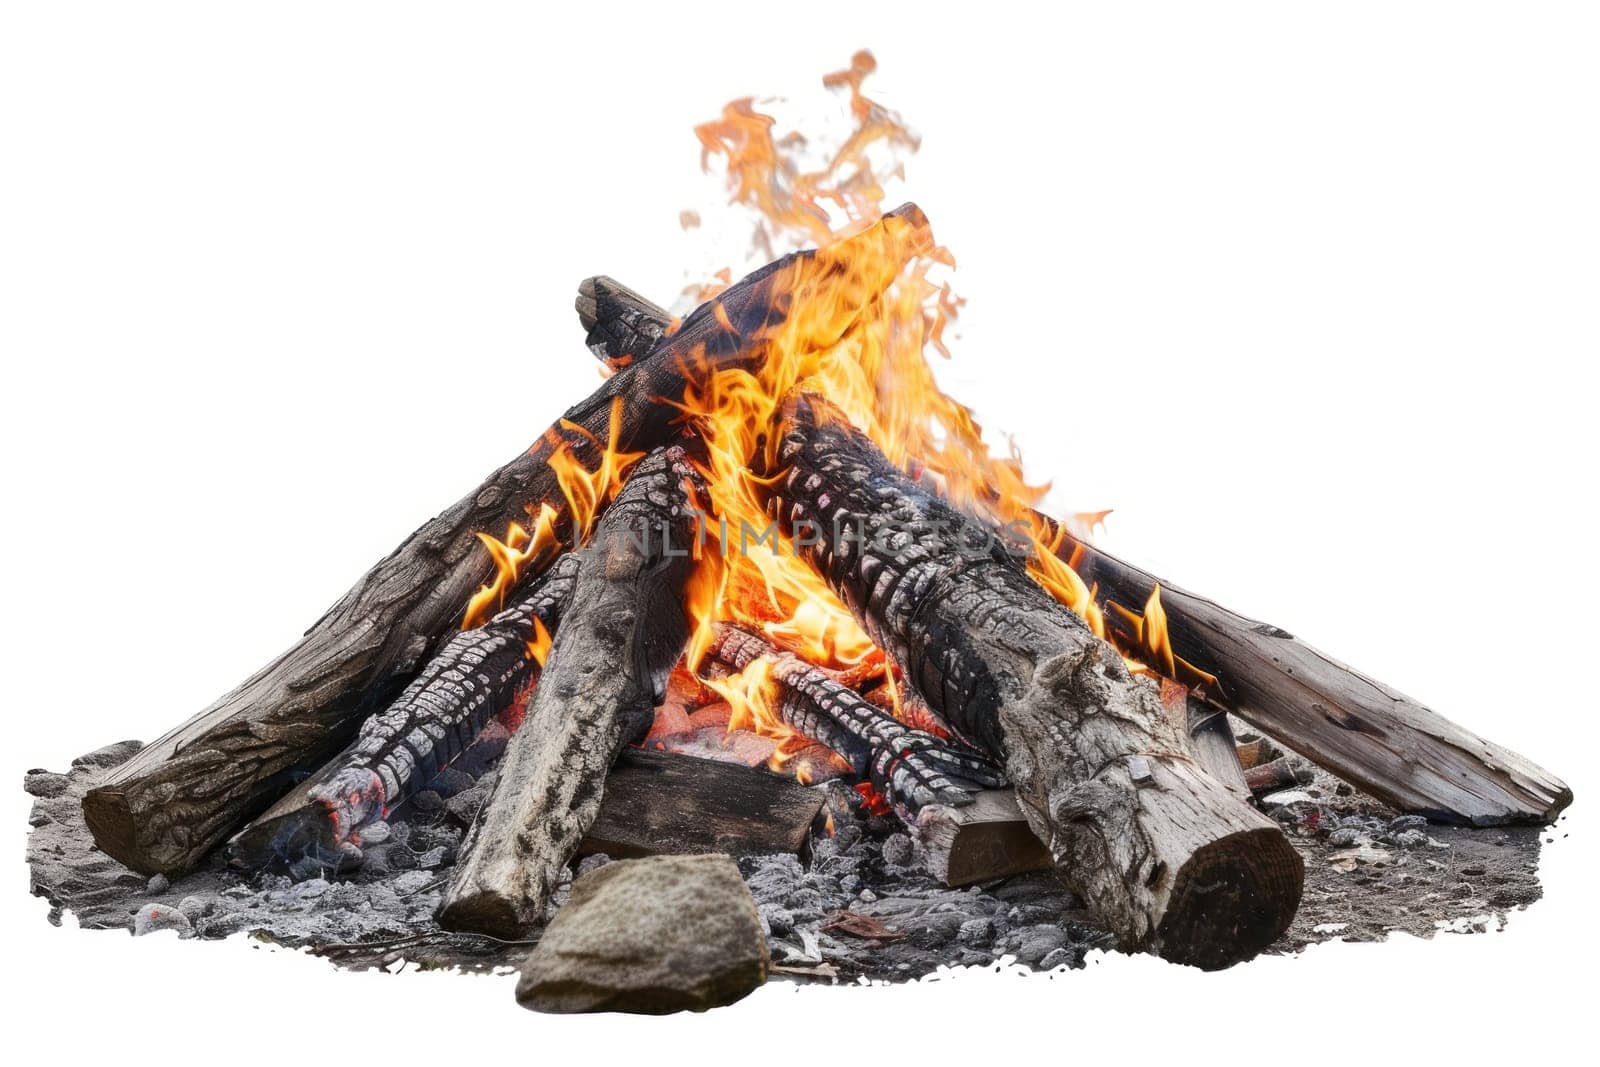 Bonfire Isolated on White Background Concept Outdoor Campfire Illustration.